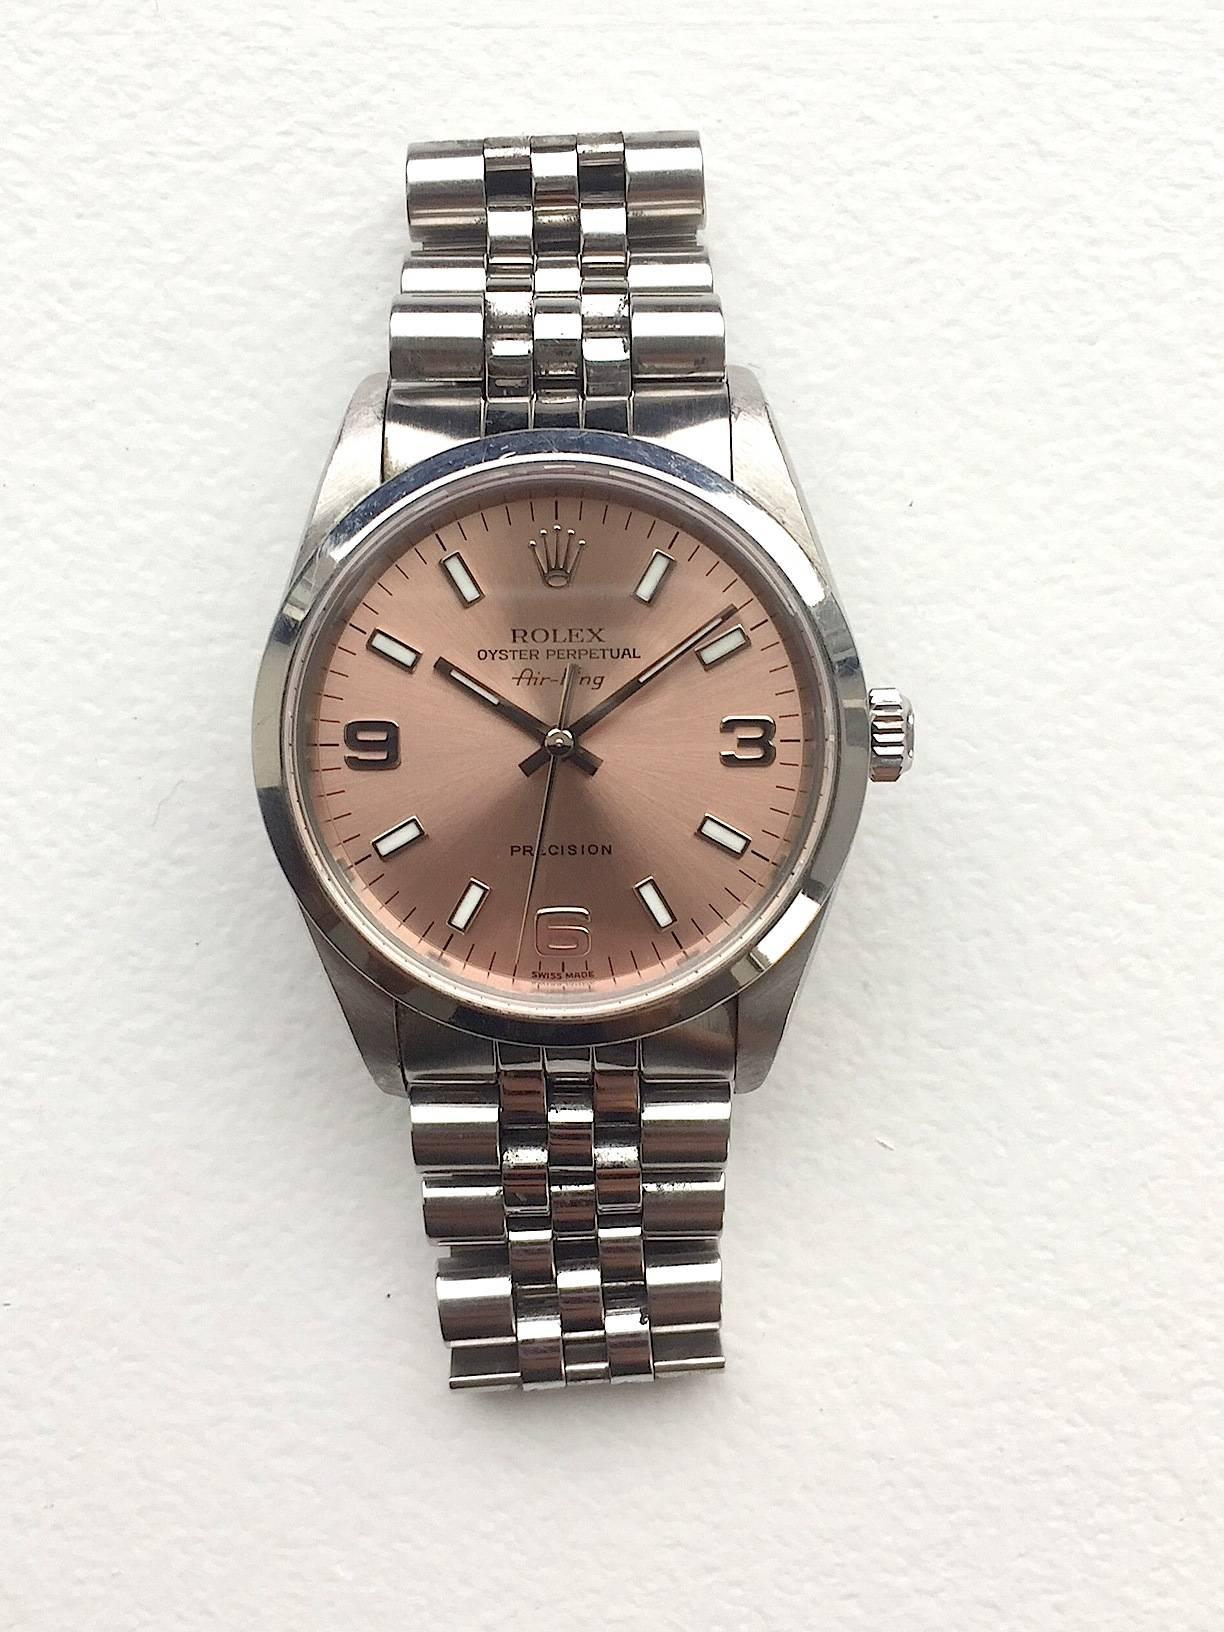 Rolex Stainless Steel Oyster Perpetual Air-King Precision Wristwatch
Factory Pink/Salmon Colored Dial with 3,6,9 Arabic Hour Markers
Smooth Stainless Steel Bezel
Stainless Steel Case
34mm in size 
Features Rolex Automatic Movement 
Sapphire